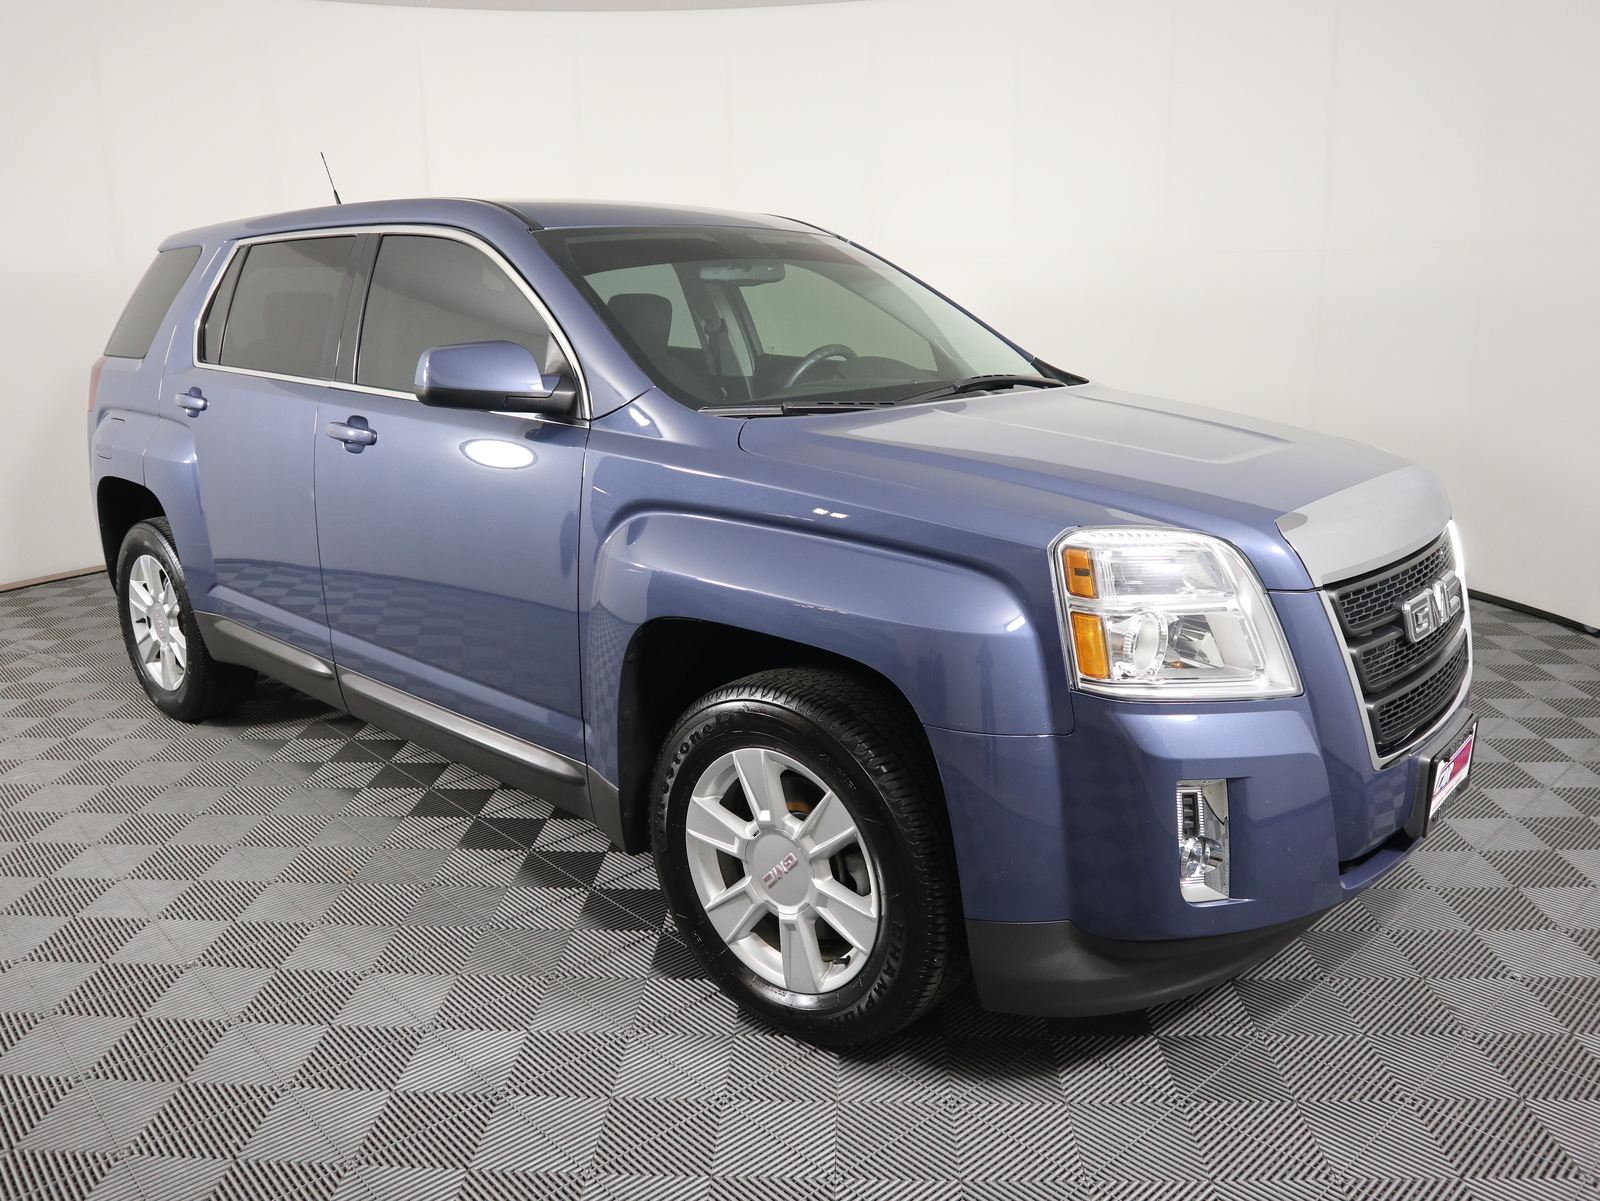 PreOwned 2011 GMC Terrain FWD 4dr SLE1 Sport Utility in Savoy 